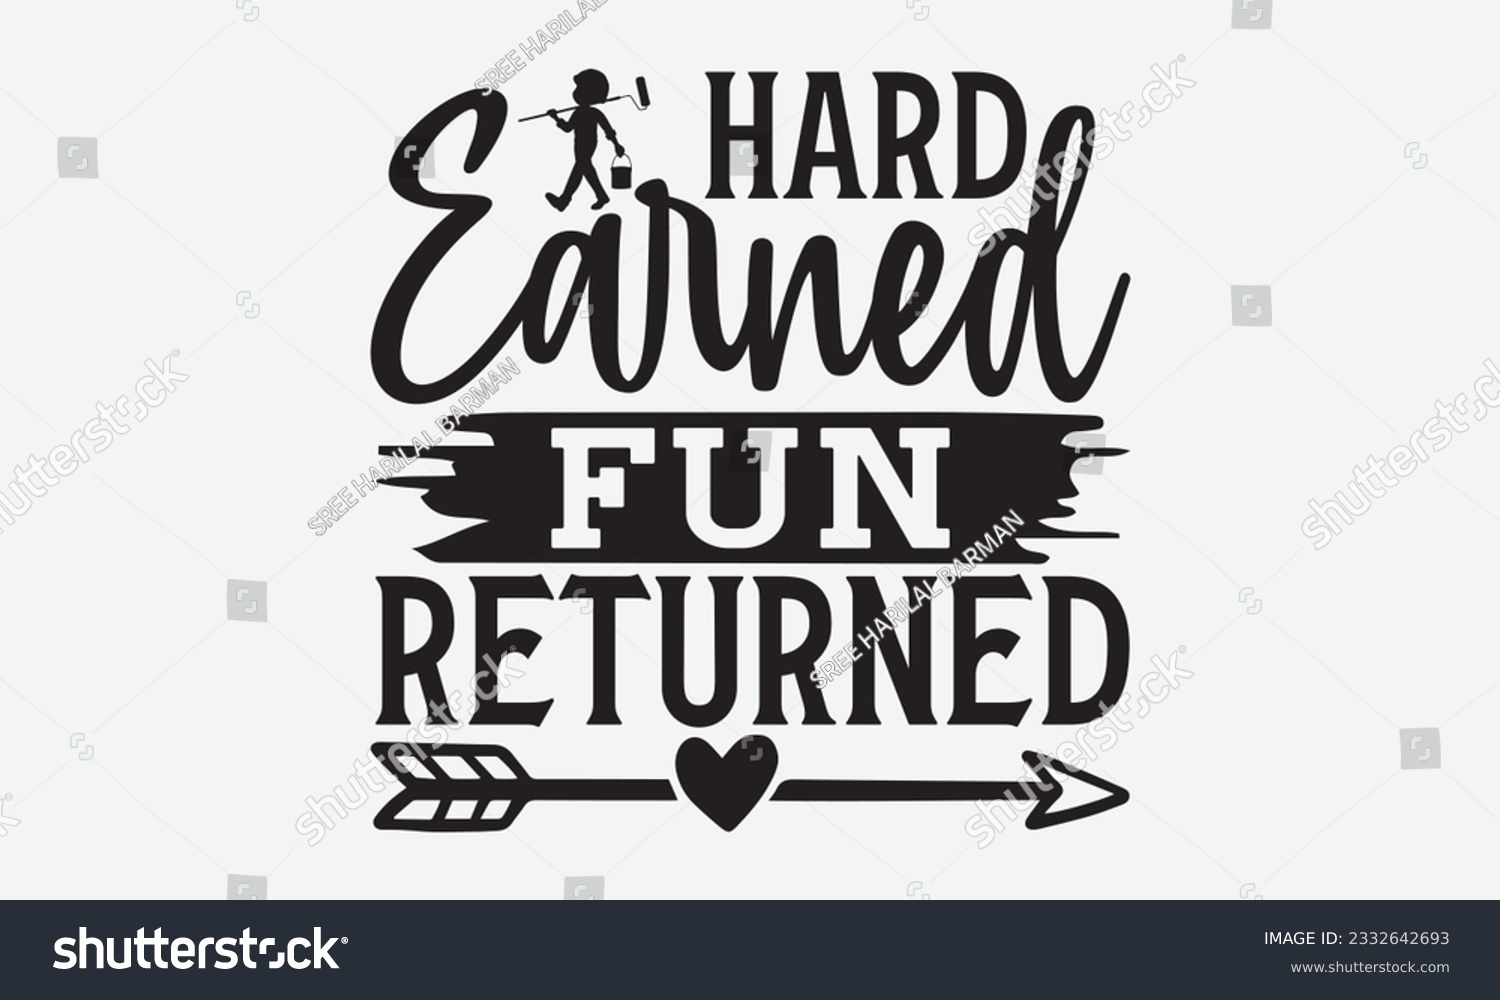 SVG of Hard Earned Fun Returned - Labor svg typography t-shirt design. celebration in calligraphy text or font Labor in the Middle East. Greeting cards, templates, and mugs. EPS 10. svg